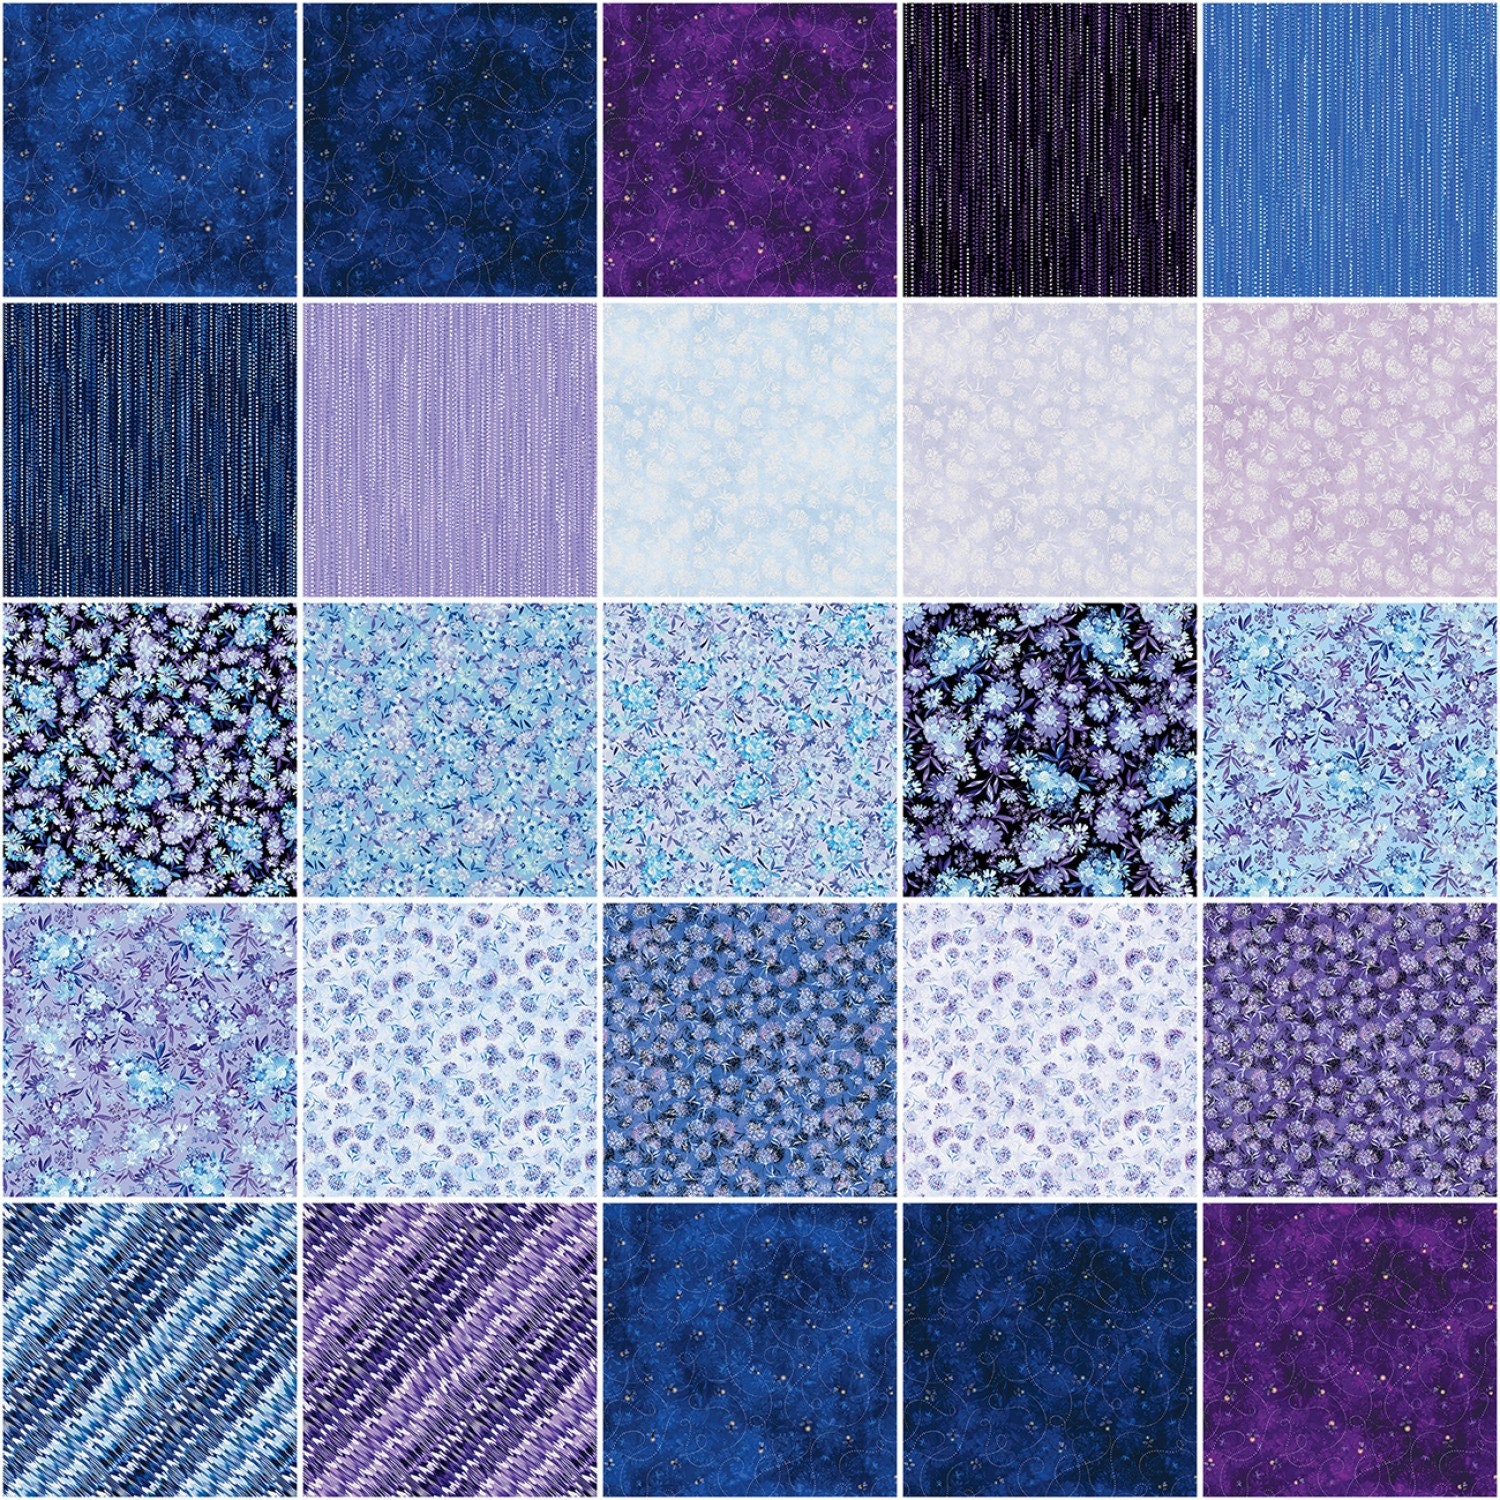 Shimmering Twilight enhanced with Pearl Essence - Floral Fabric Square -  Keri Quilts